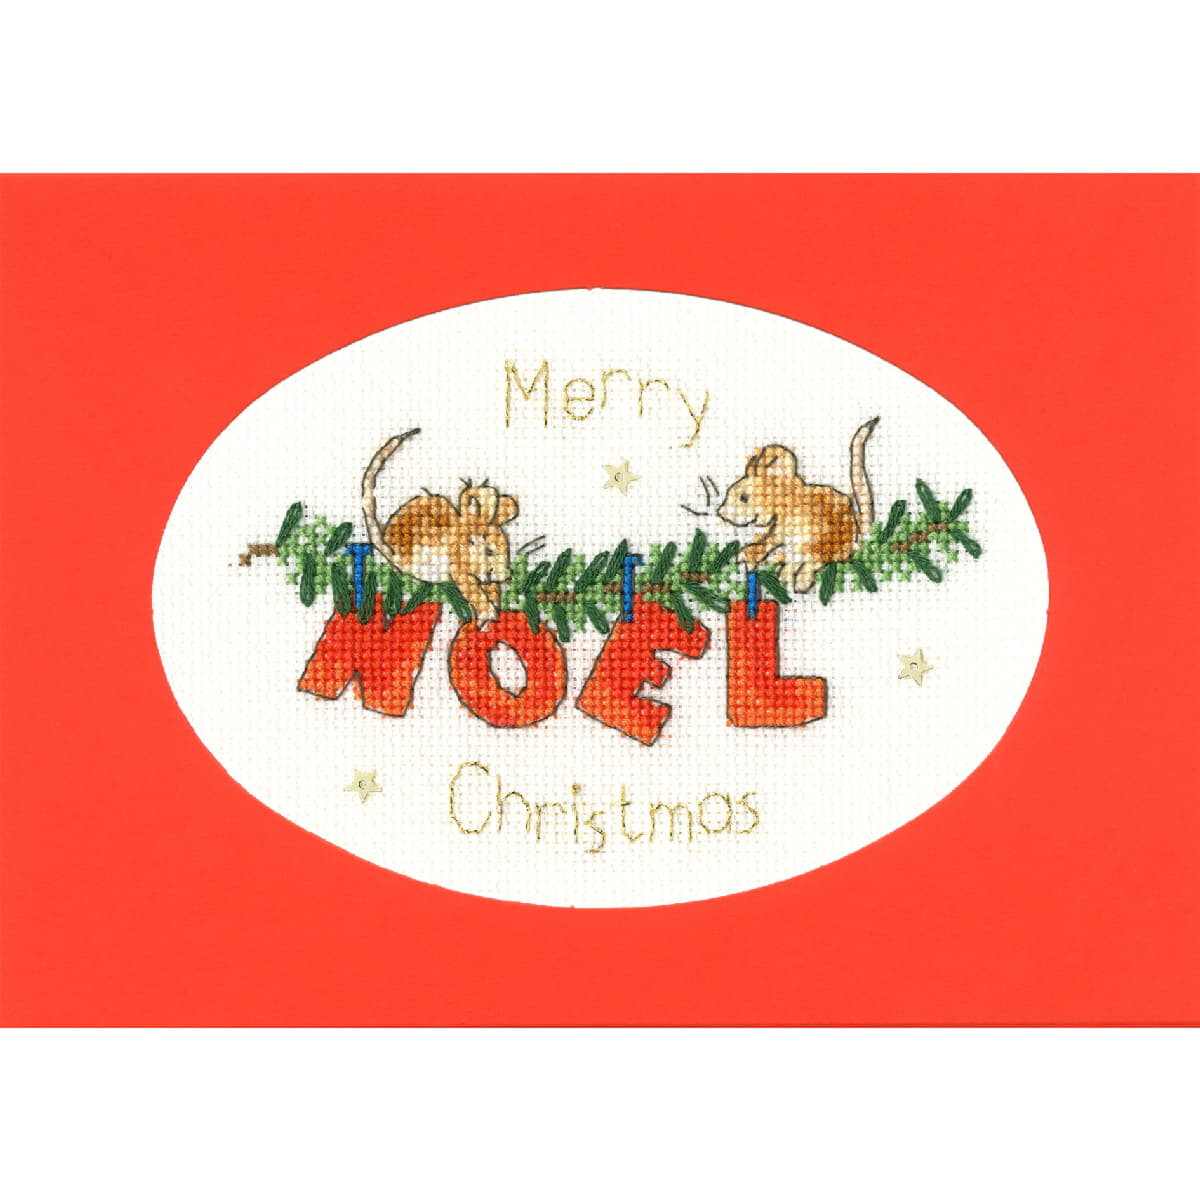 A Christmas card with a red background and an embroidered...